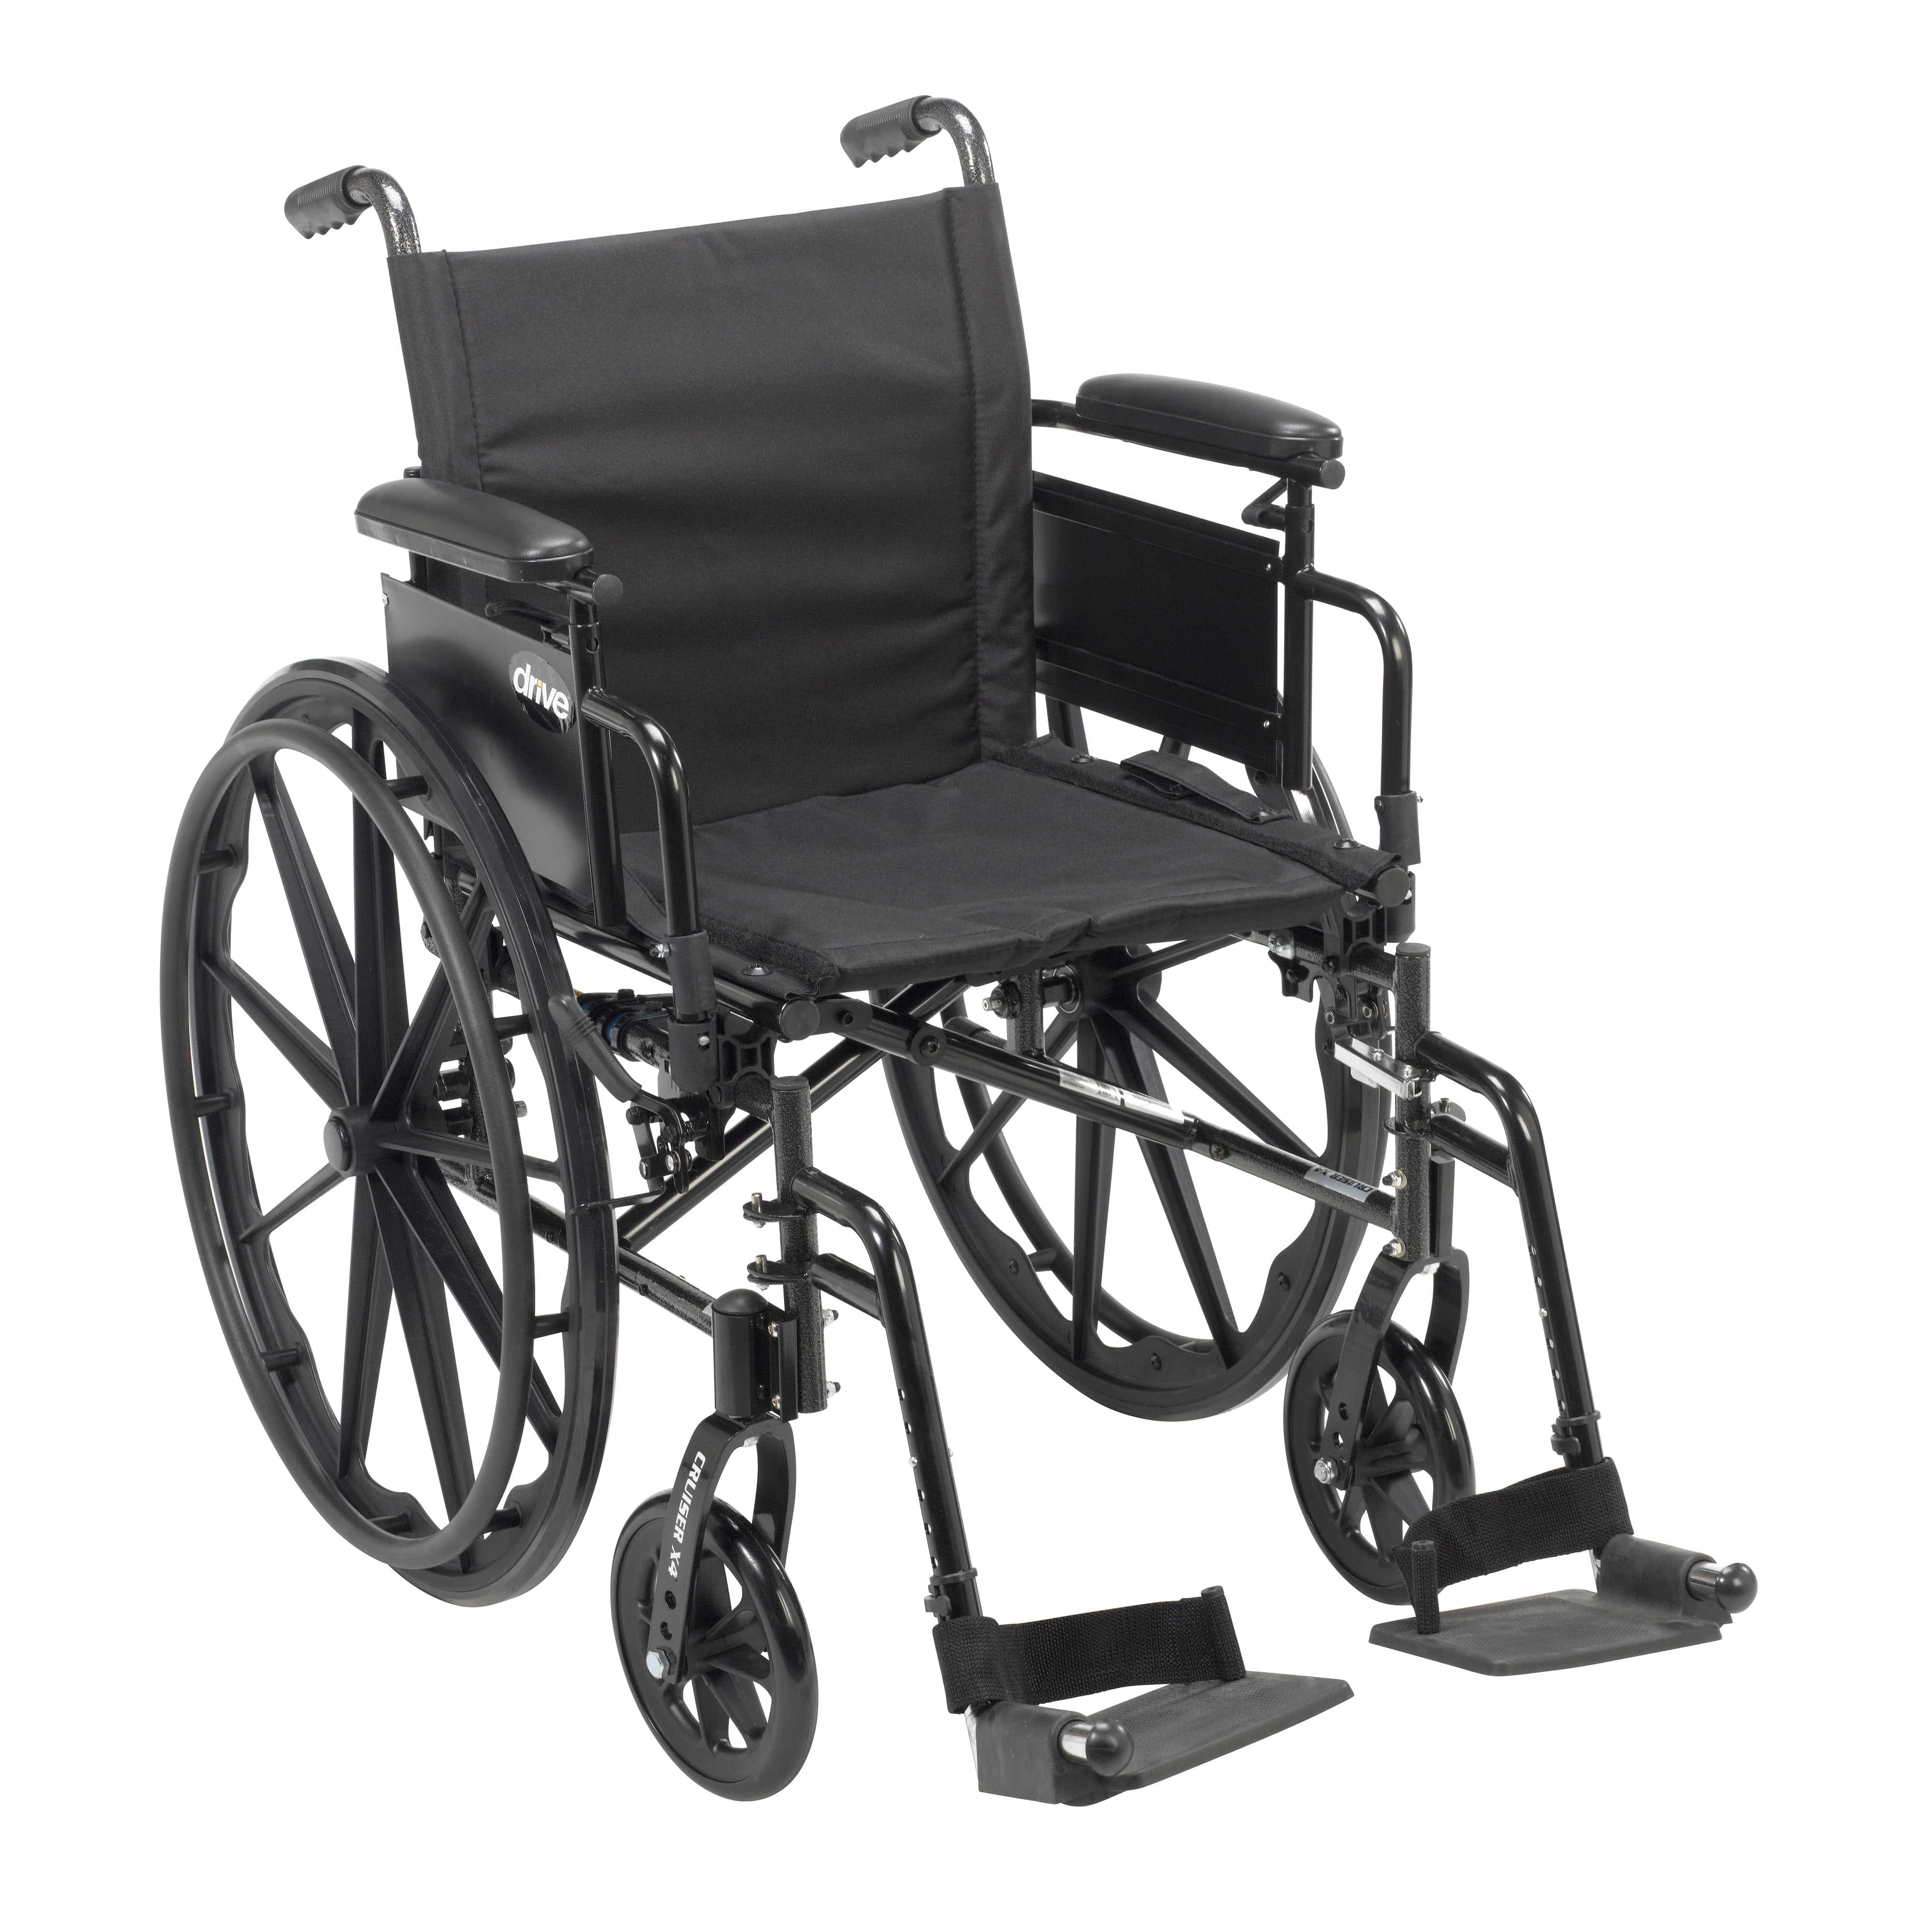 Drive Medical Wheelchairs/Lightweight Wheelchairs Desk Arms / Swing Away Footrests / 20" Seat Drive Medical Cruiser X4 Lightweight Dual Axle Wheelchair with Adjustable Detatchable Arms